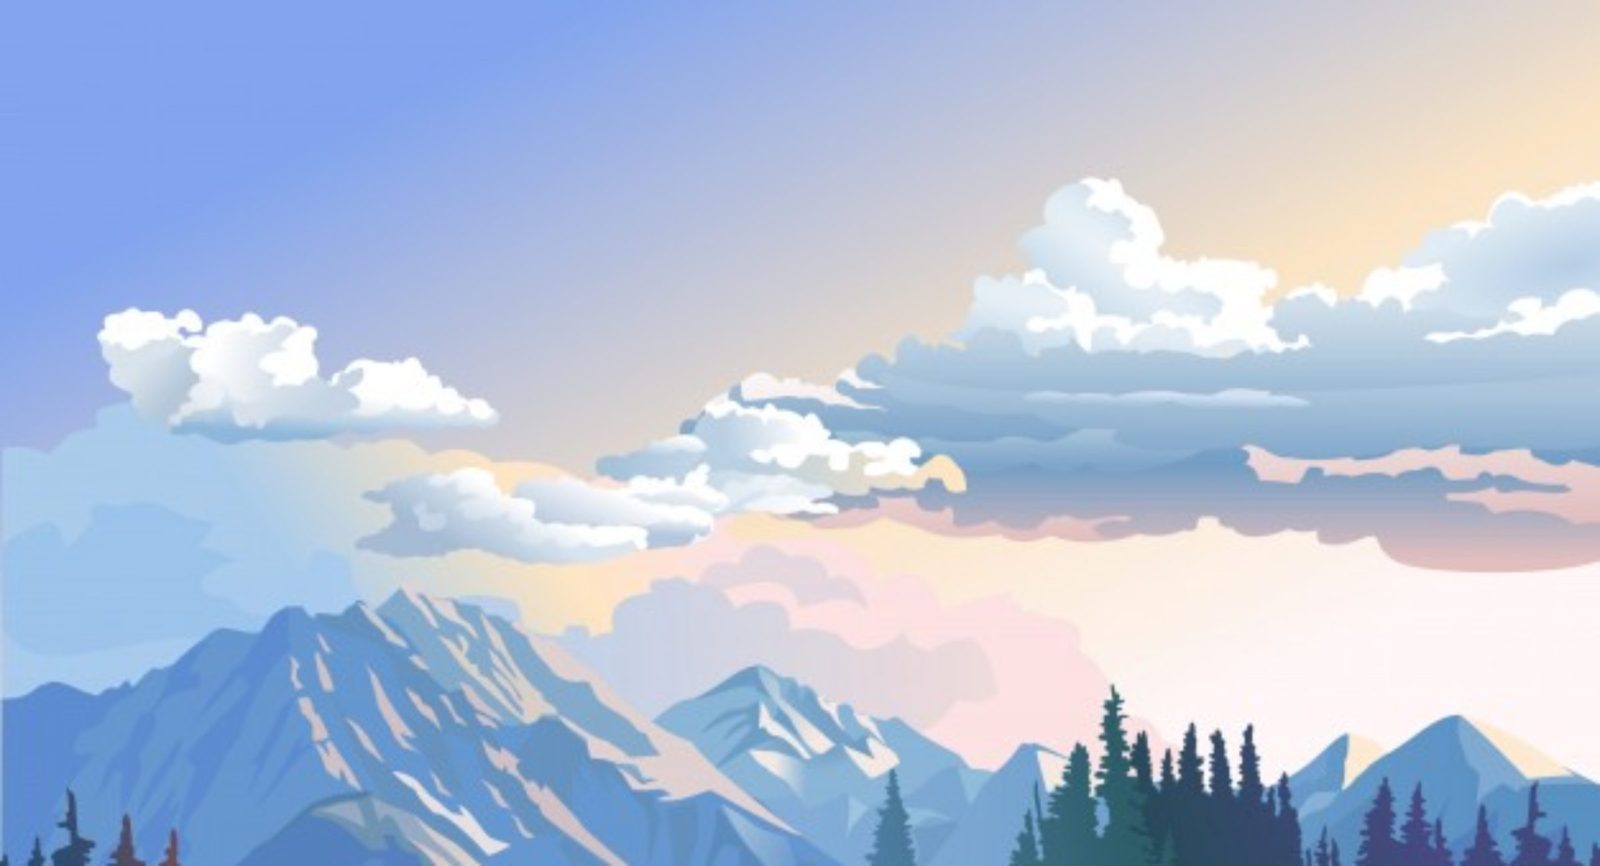 cropped-vector-illustration-of-a-mountain-landscape_1441-77.jpg